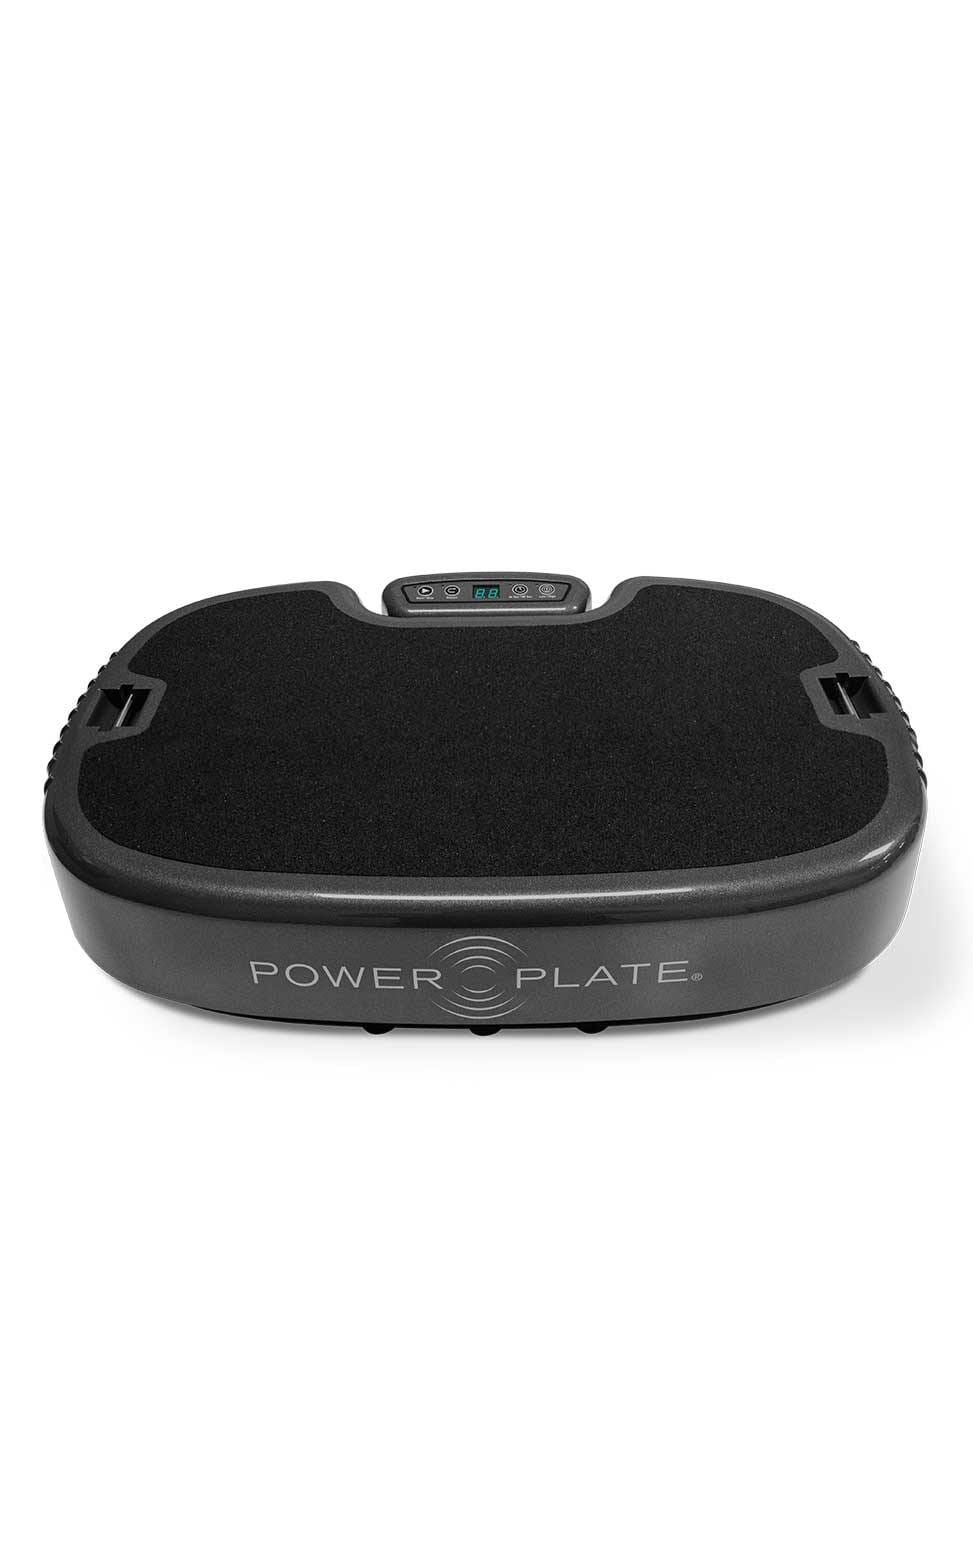 Personal Power Plate Vibration Therapy